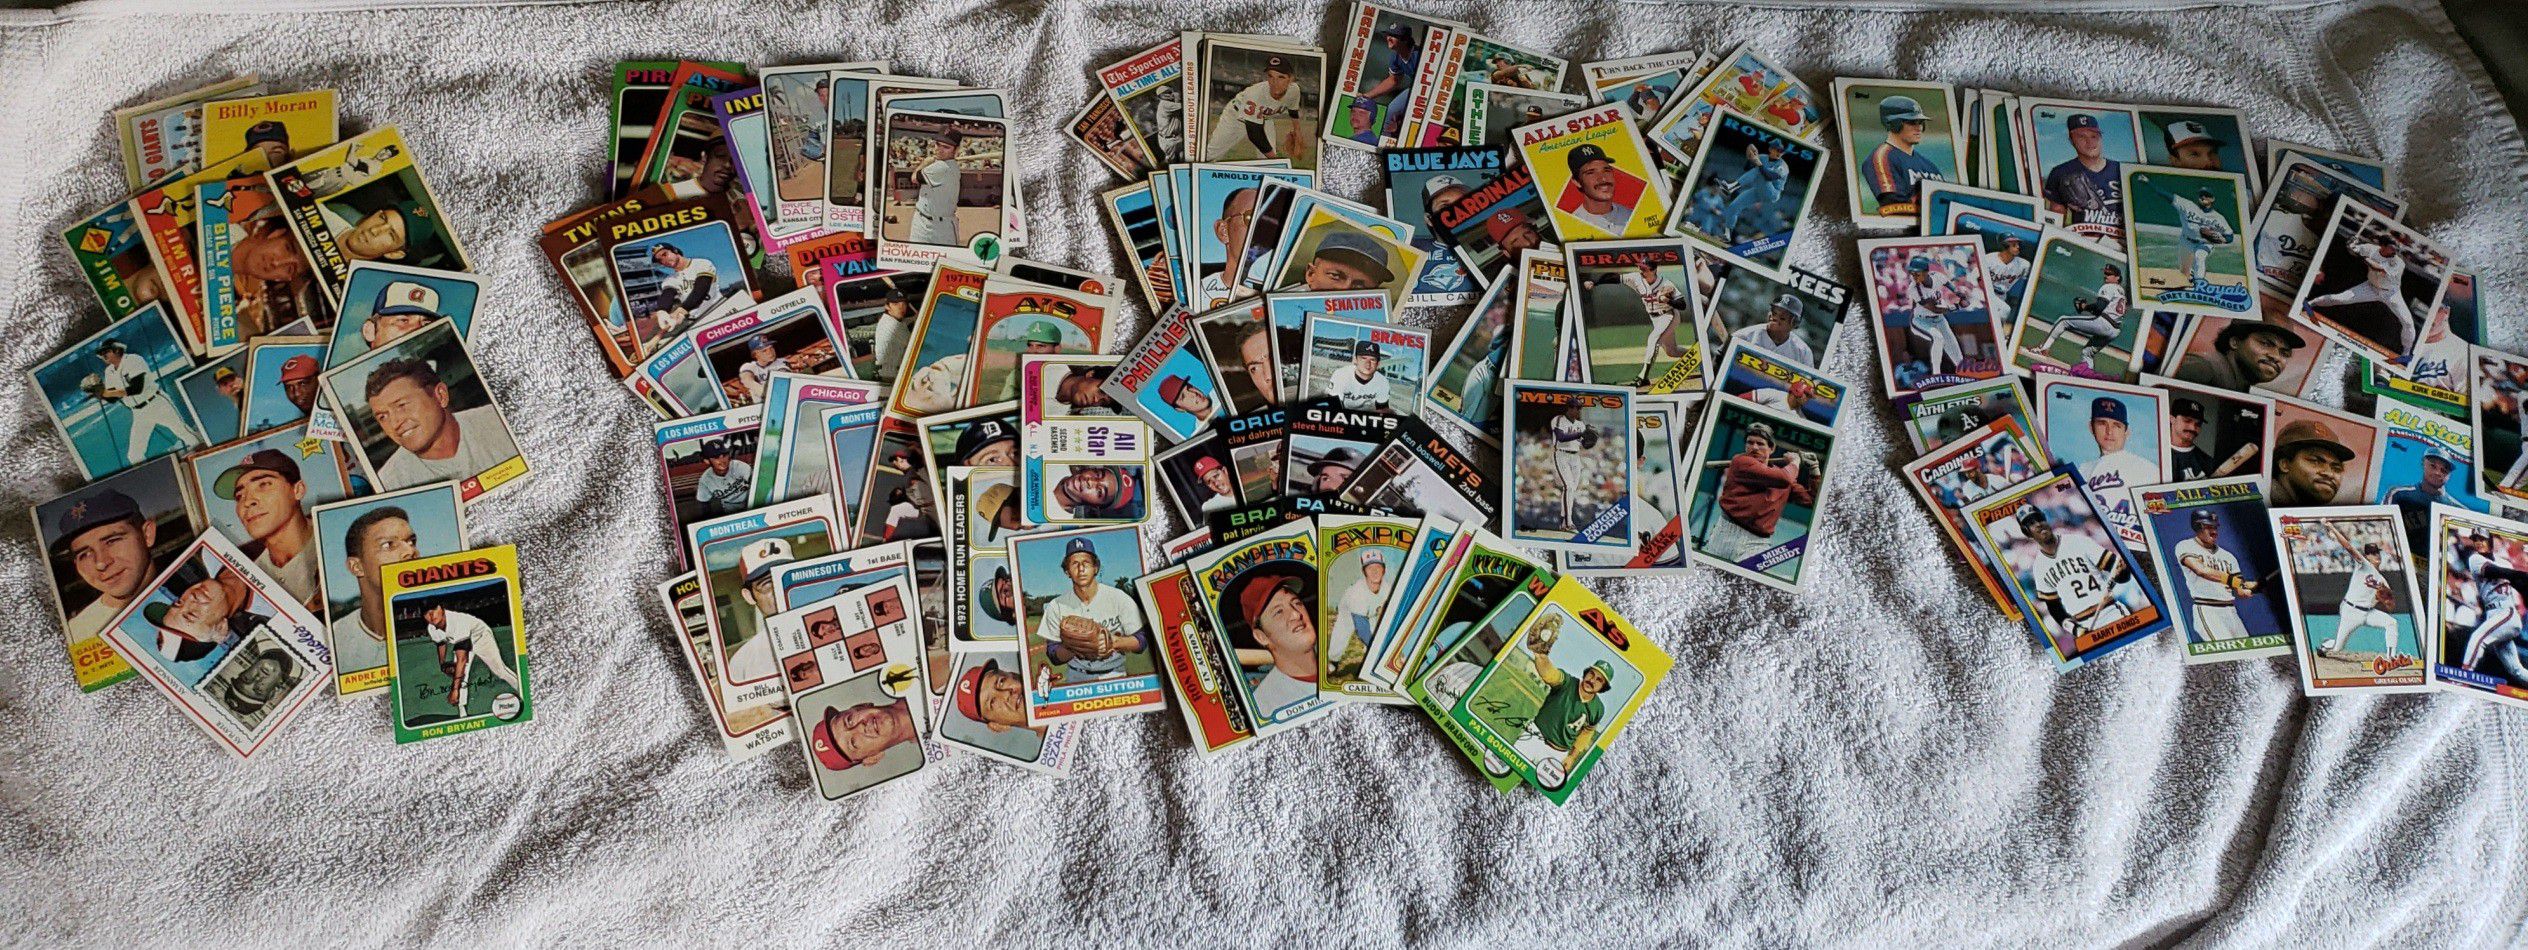 Lot of Topps Baseball Cards 1960s to 1990s